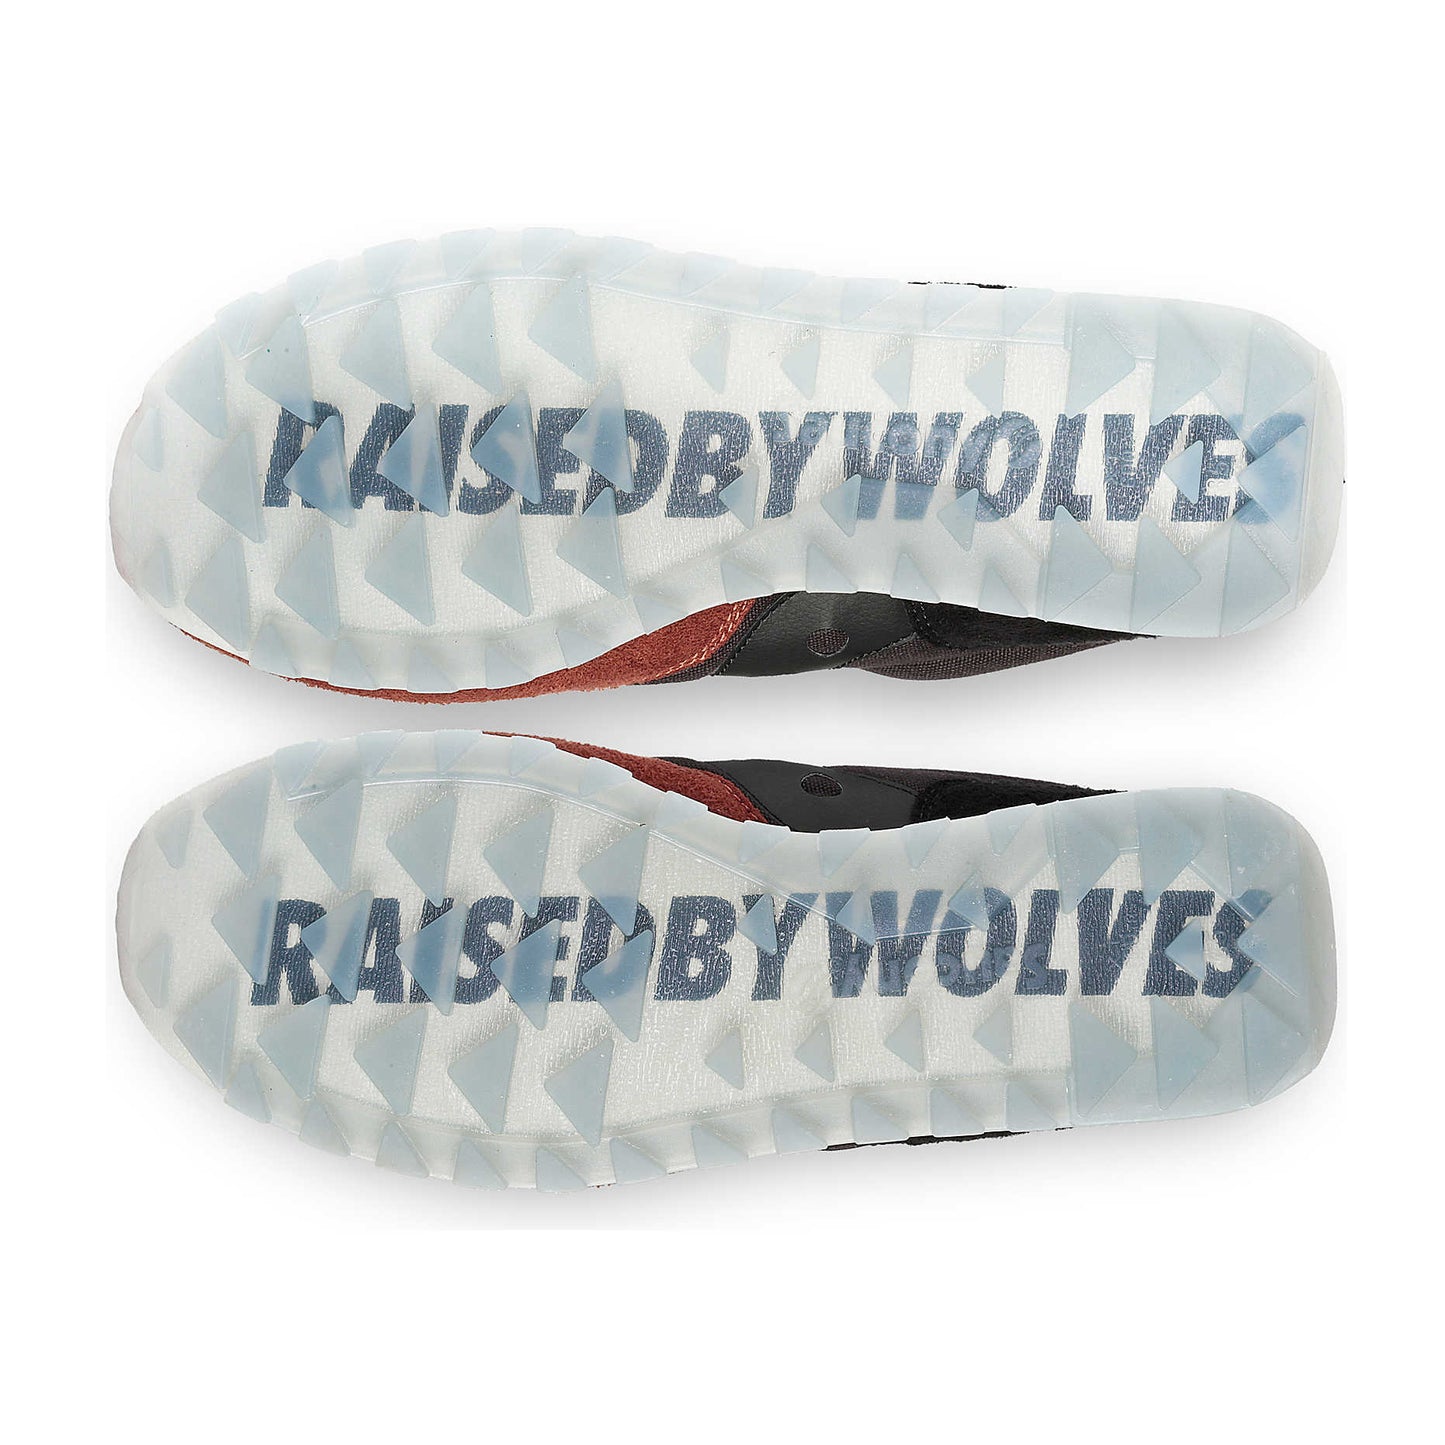 Saucony Jazz 81 x Raised By Wolves "Feral Child"